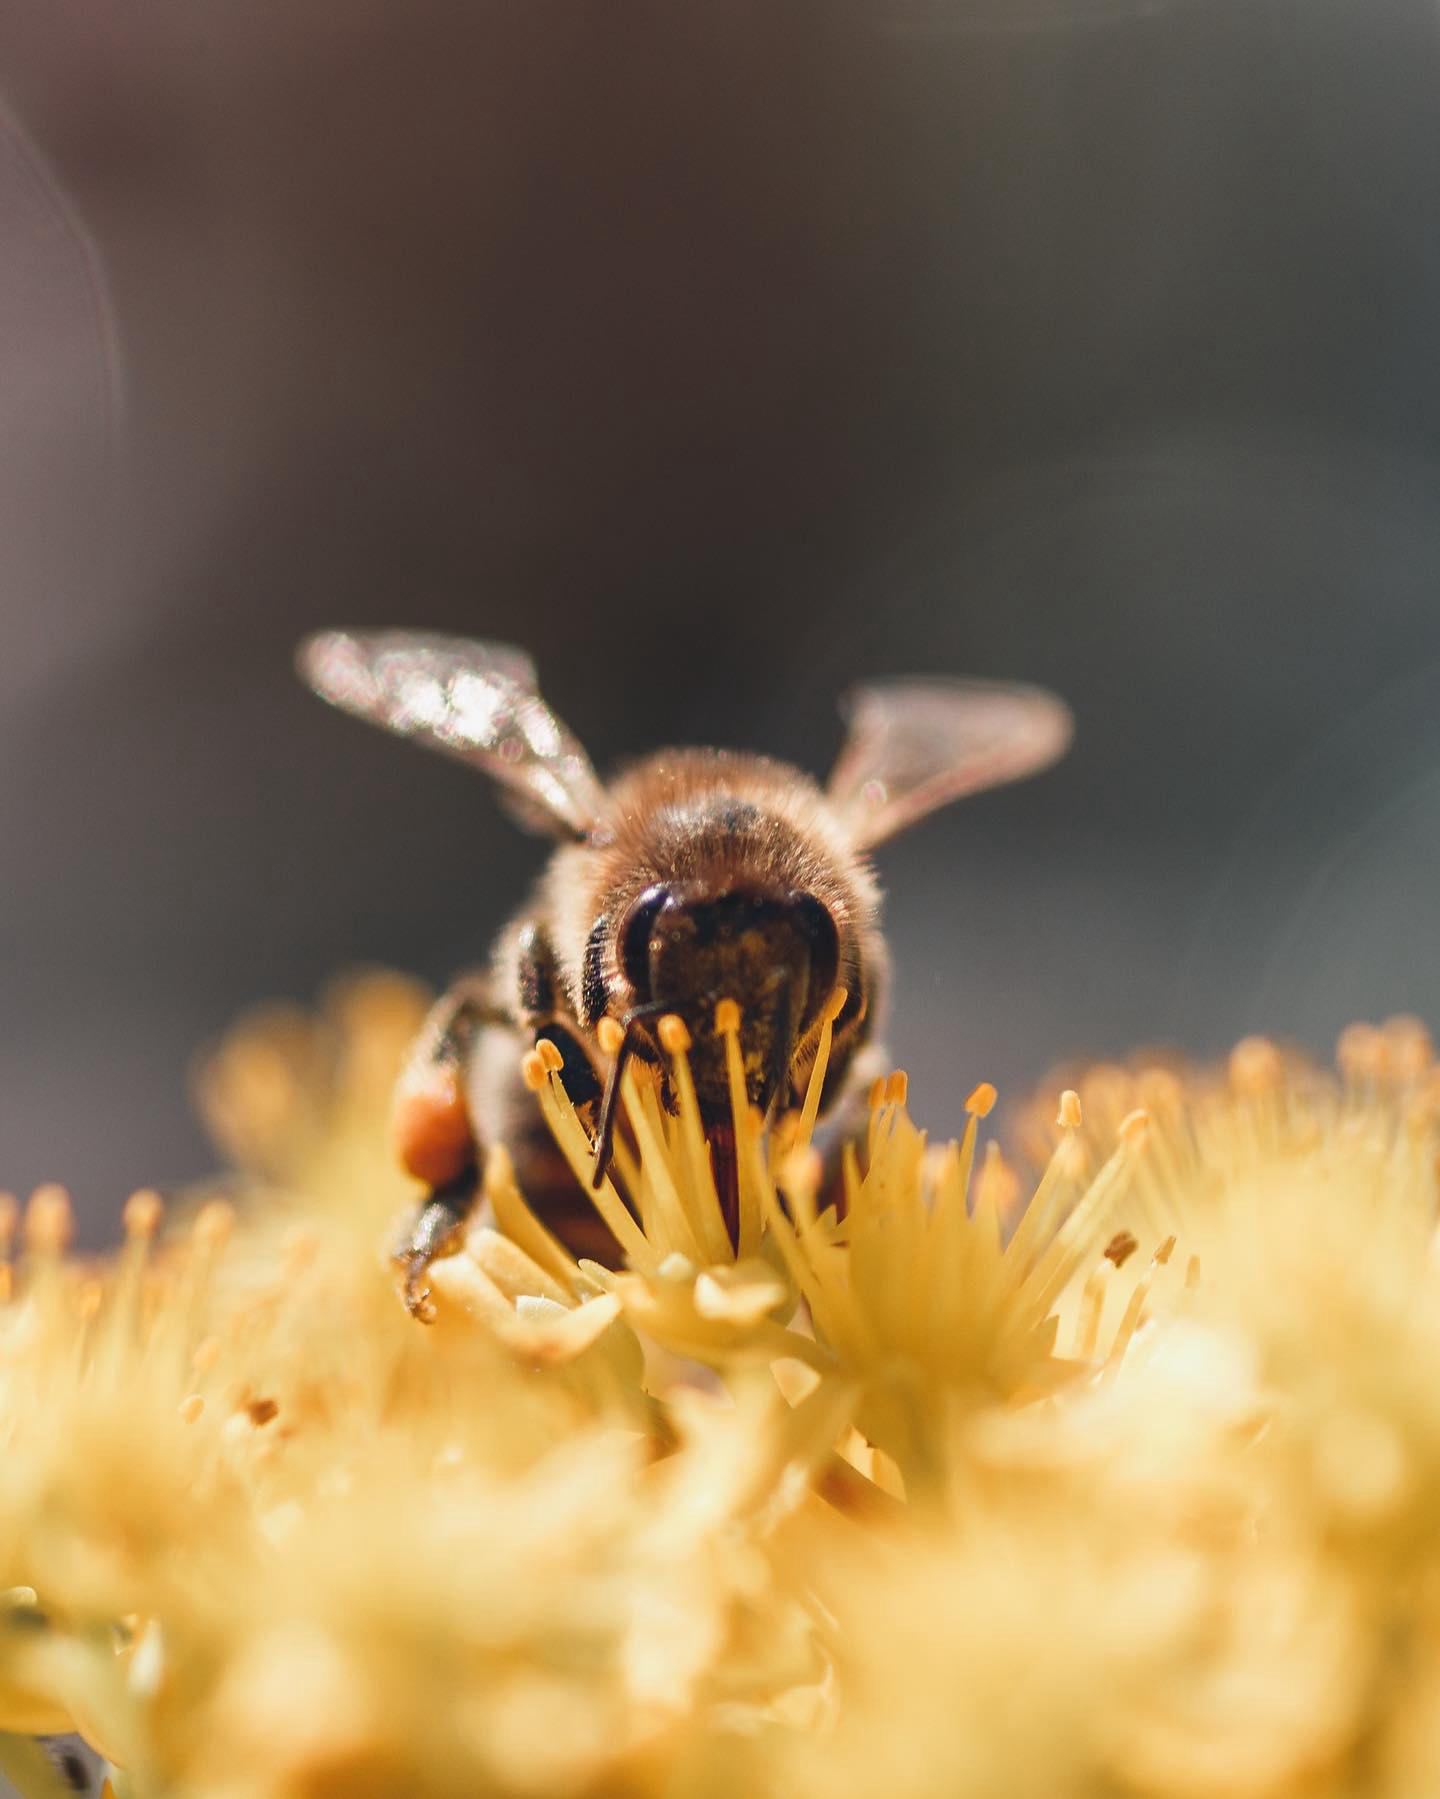 image  1 Guerlain - As part of the #GuerlainForBees initiative, Guerlain is committed to protecting the futur